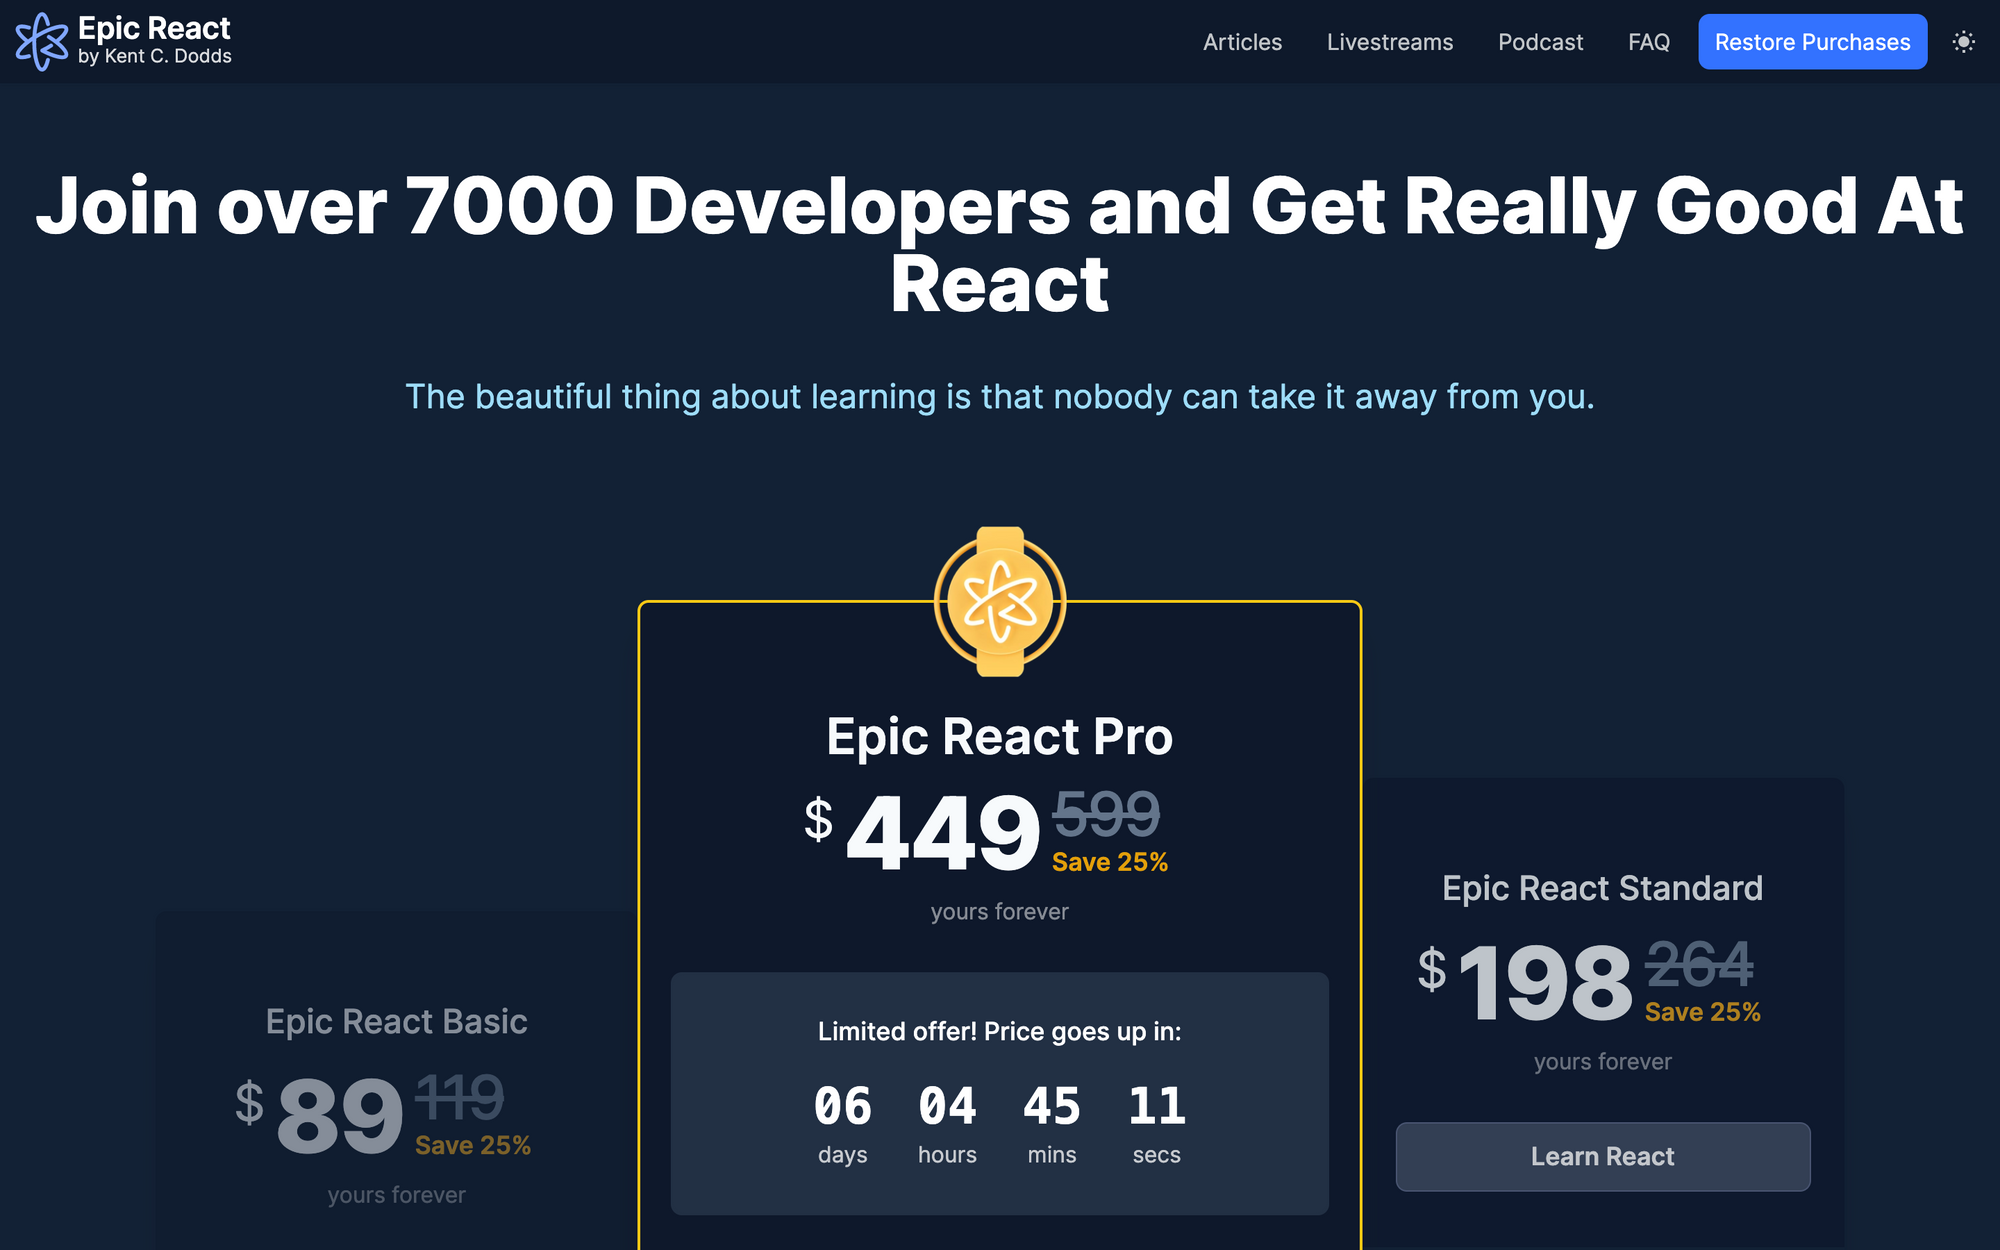 10+ Hot Summer Deals for Web Developers and Web Designers